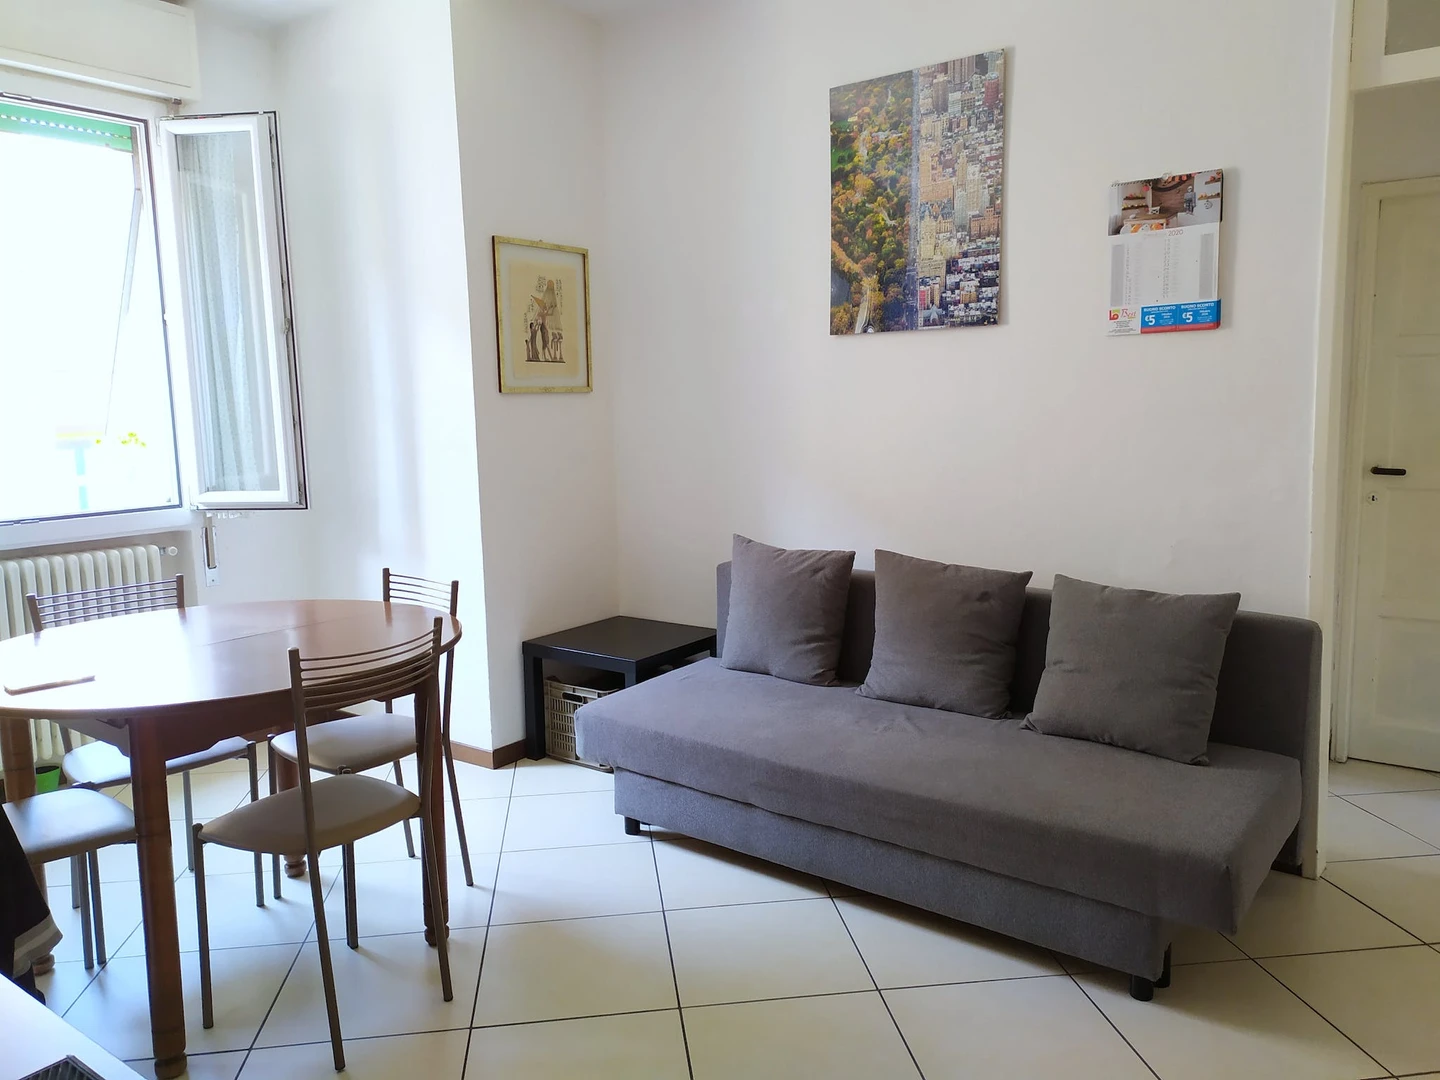 Room for rent in a shared flat in Forlì